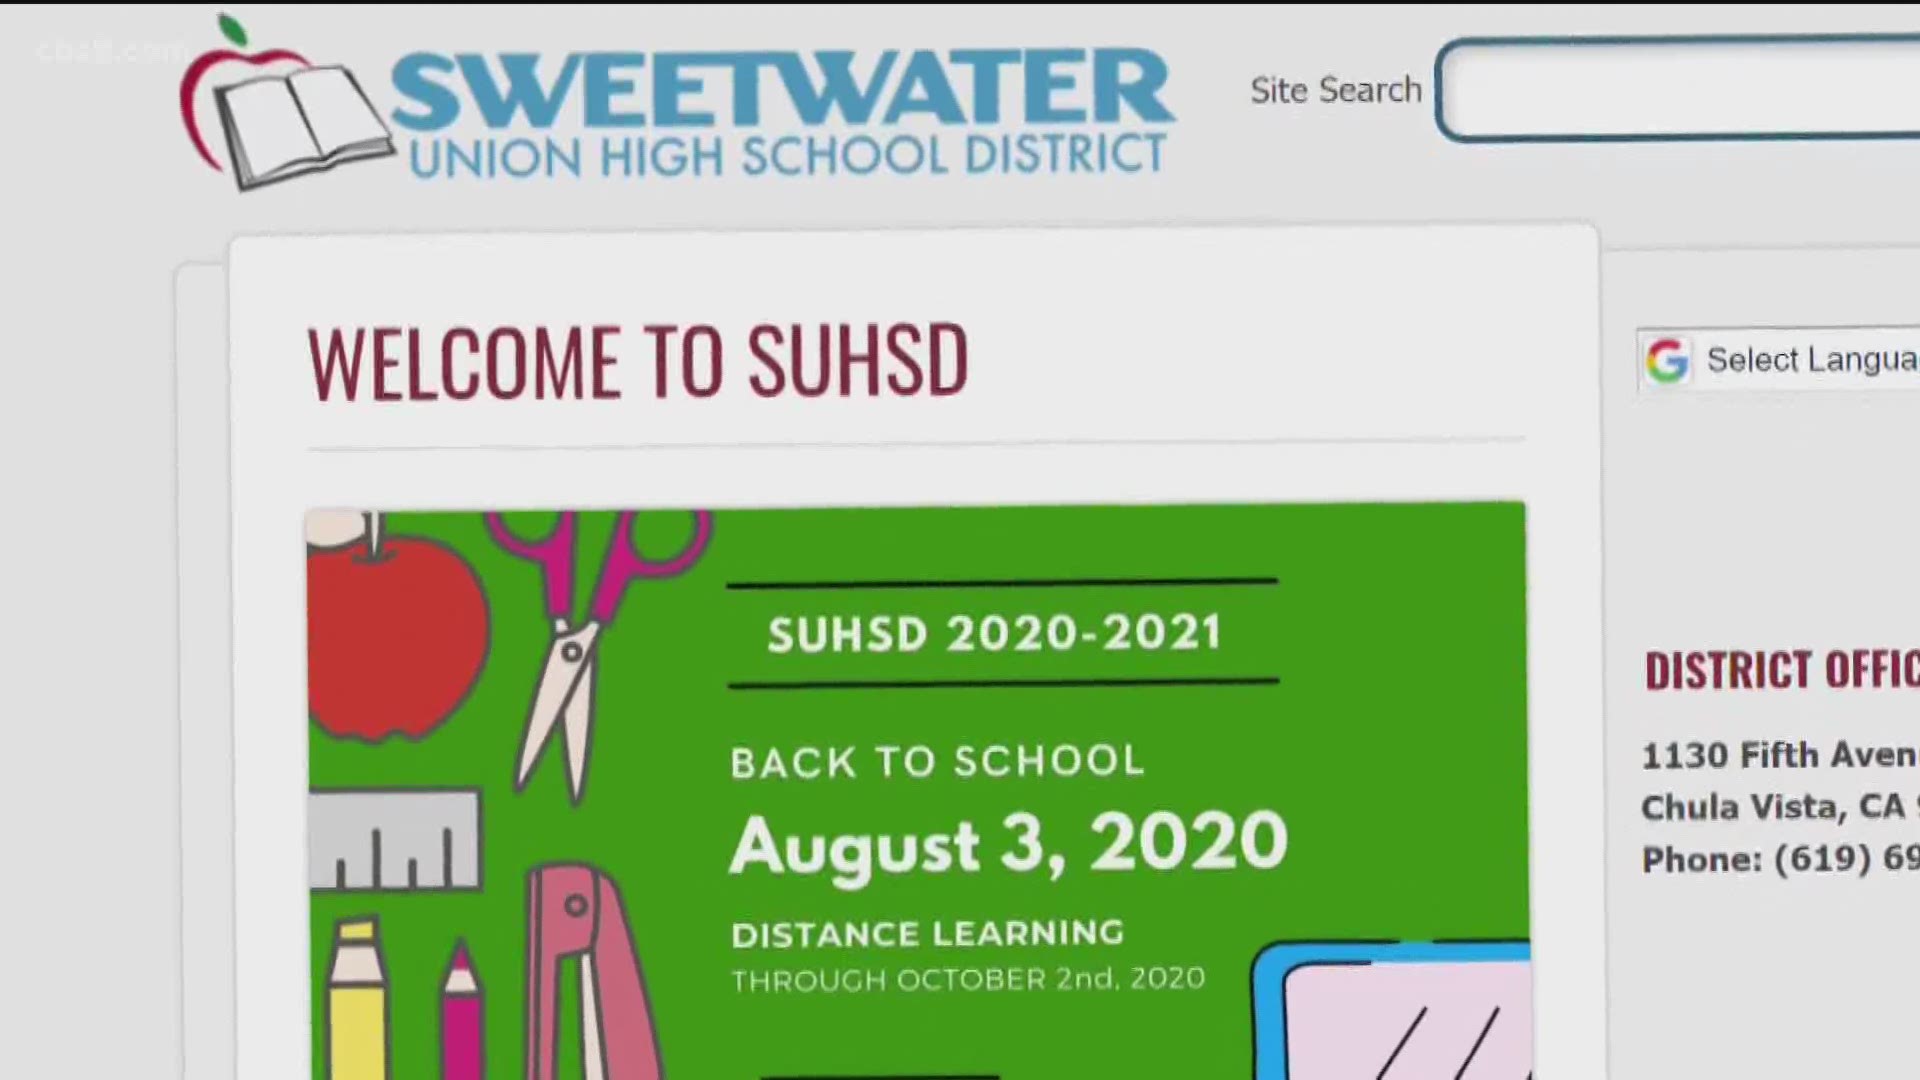 The Sweetwater Union High School District started school on August 3.